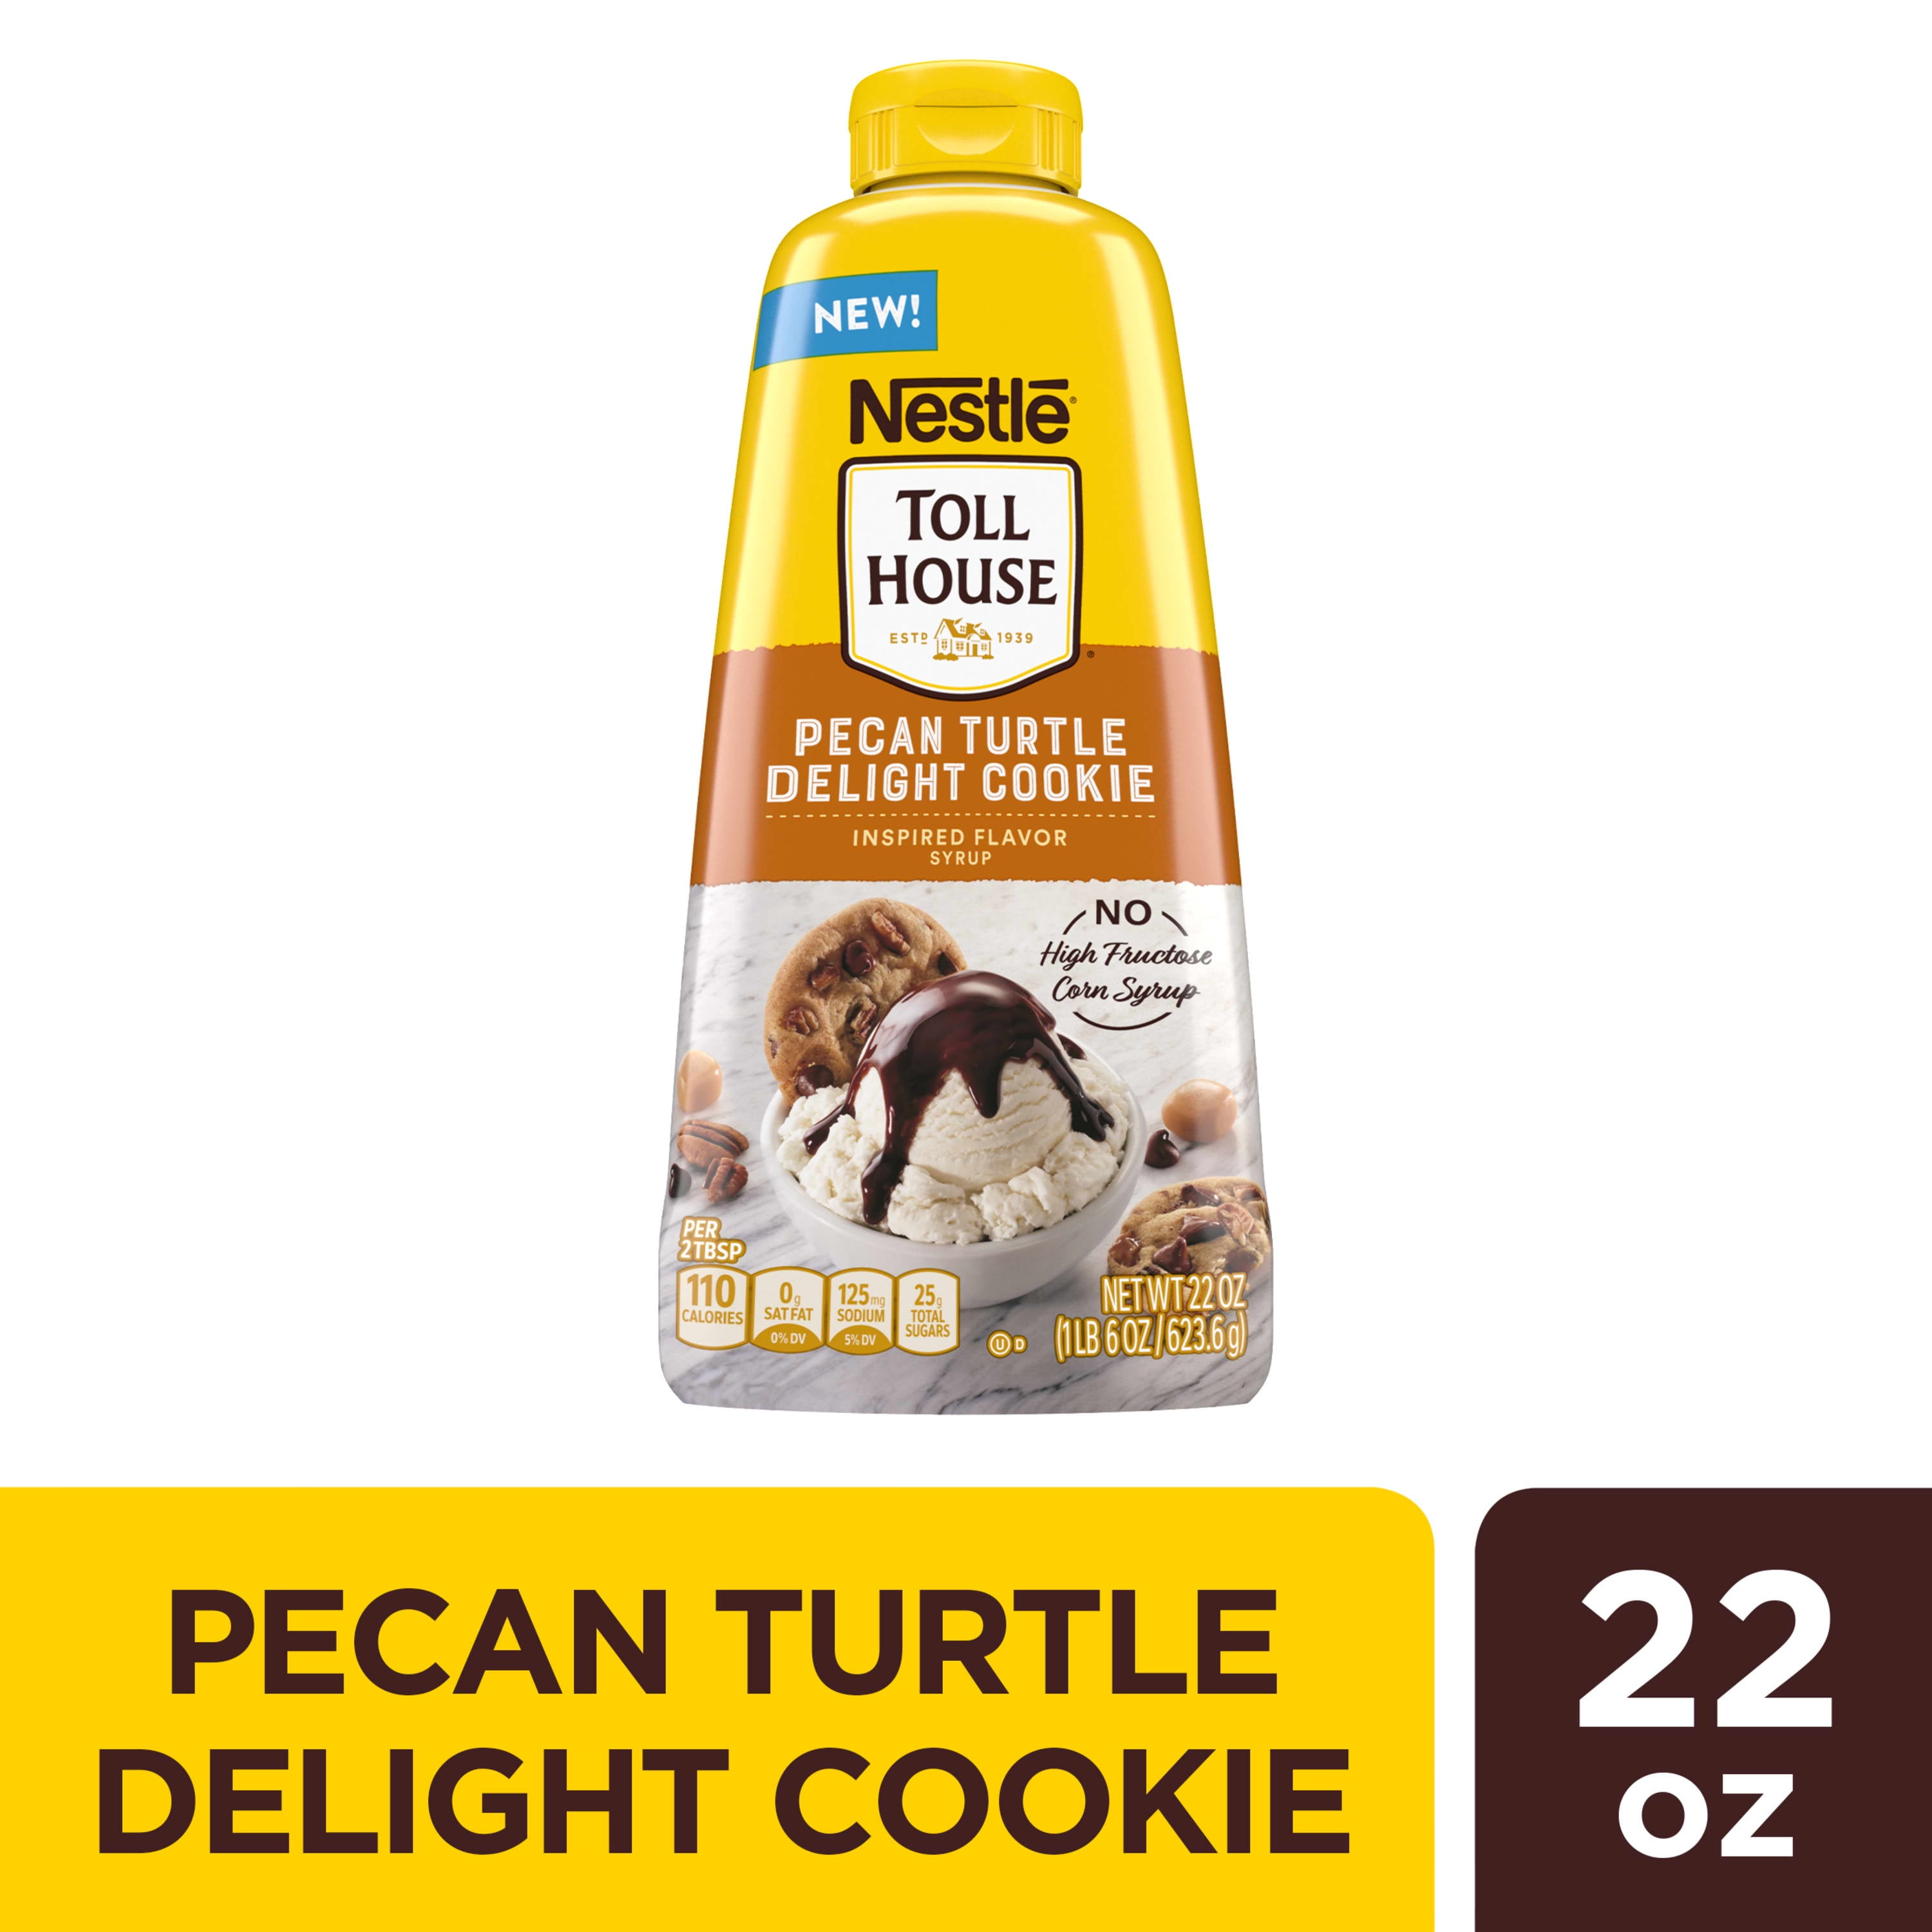 Nestle Toll House Pecan Turtle Delight Cookie Inspired Flavor Syrup 1